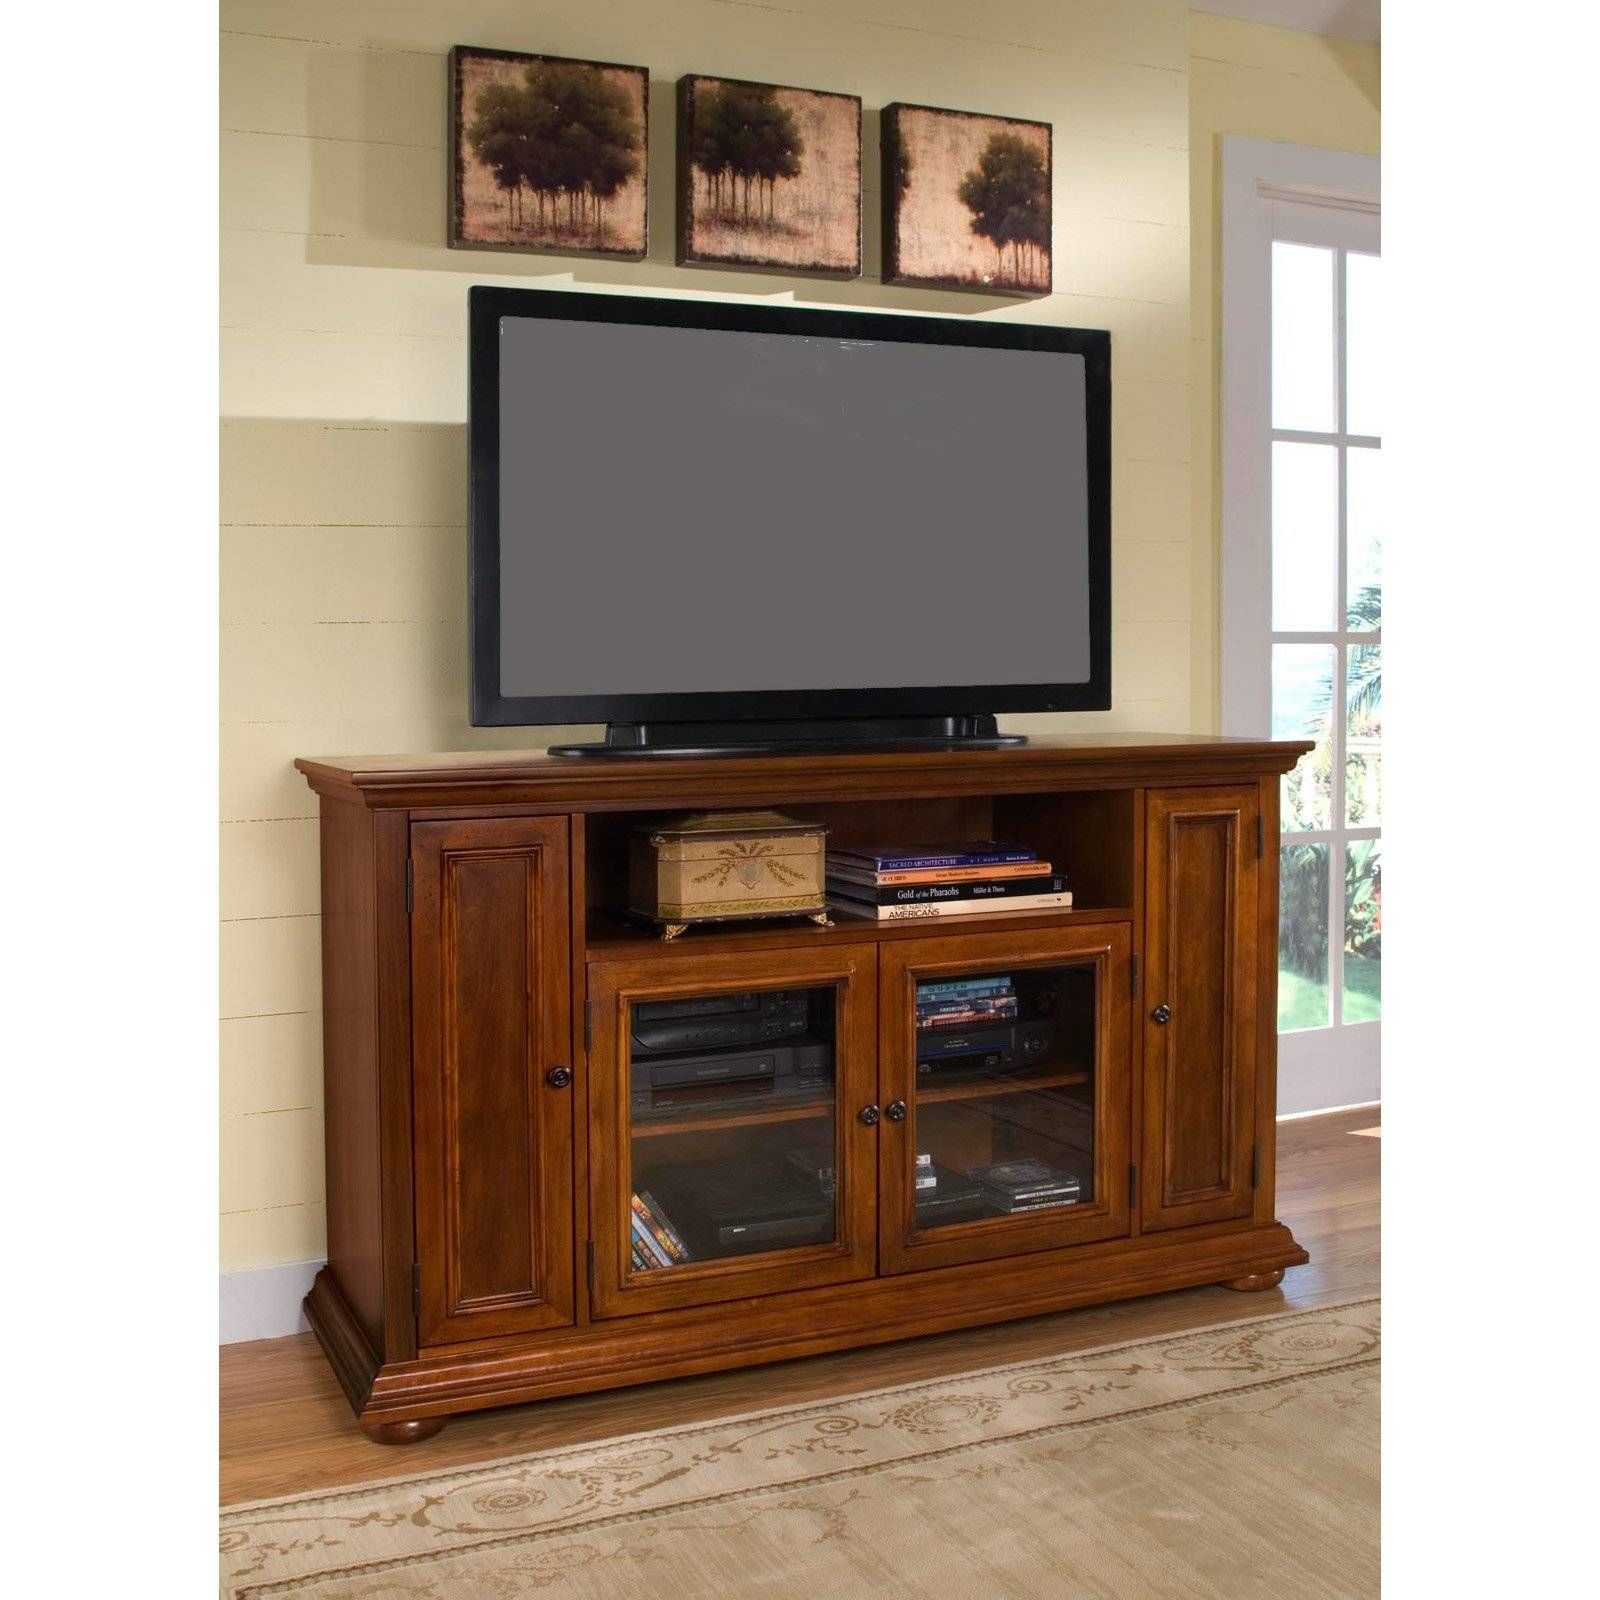 Rectangle Black Flat Screen Tv Over Brown Wooden Cabinet With Within Wooden Tv Cabinets (View 7 of 15)